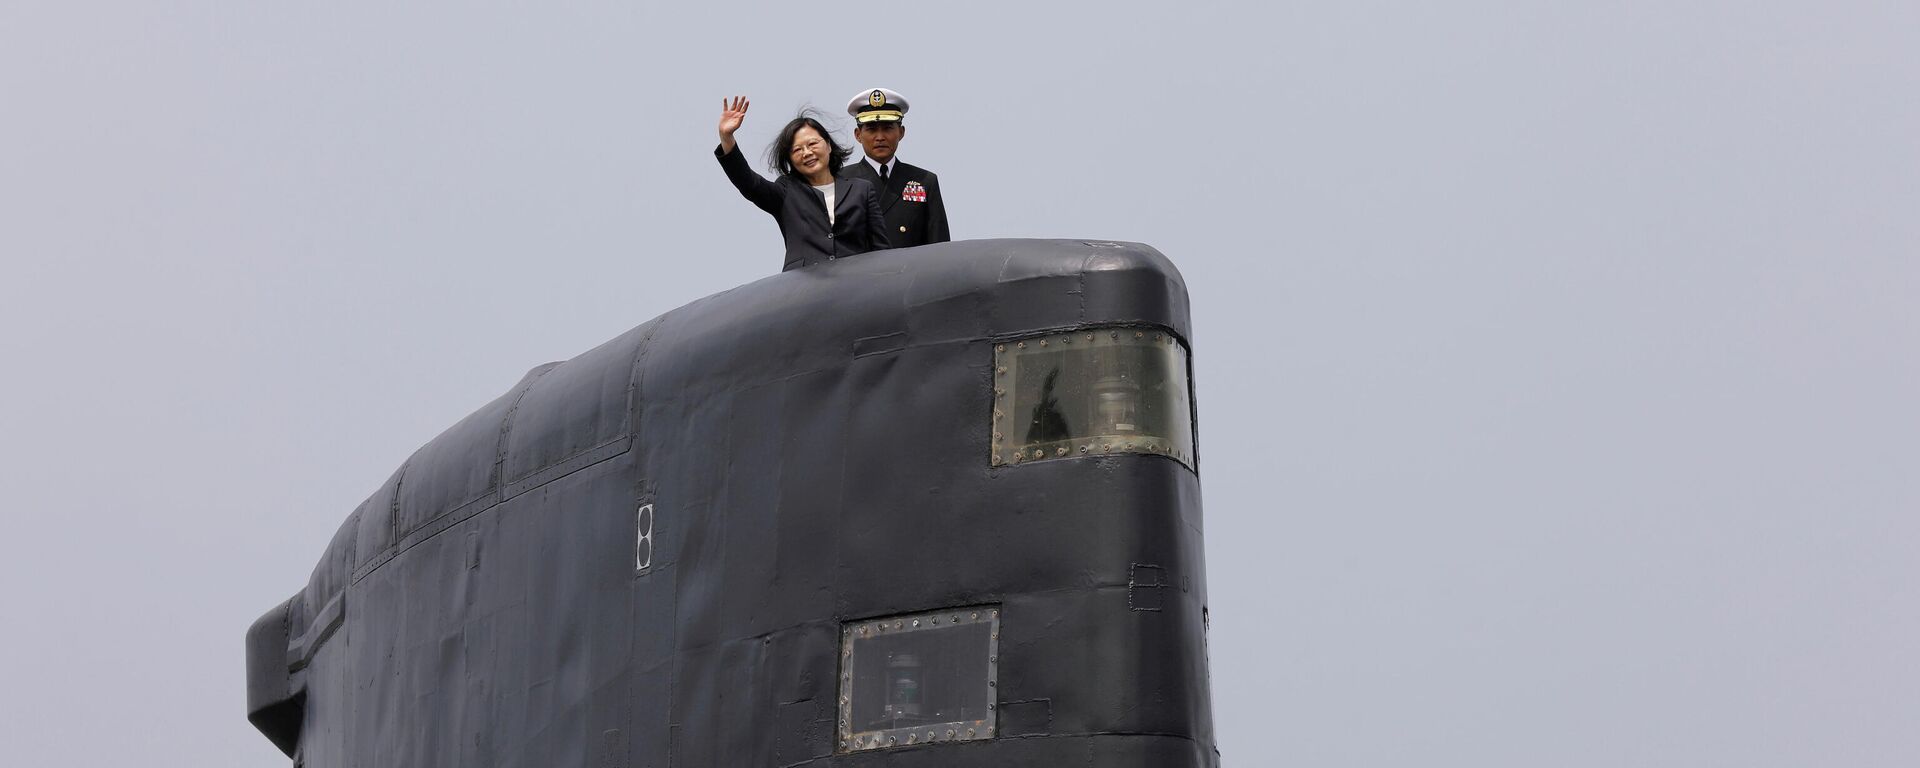 Taiwan President Tsai Ing-wen waves as she boards Hai Lung-class submarine (SS-794) during her visit to a navy base in Kaohsiung, Taiwan 21 March 2017.  - Sputnik International, 1920, 06.12.2021